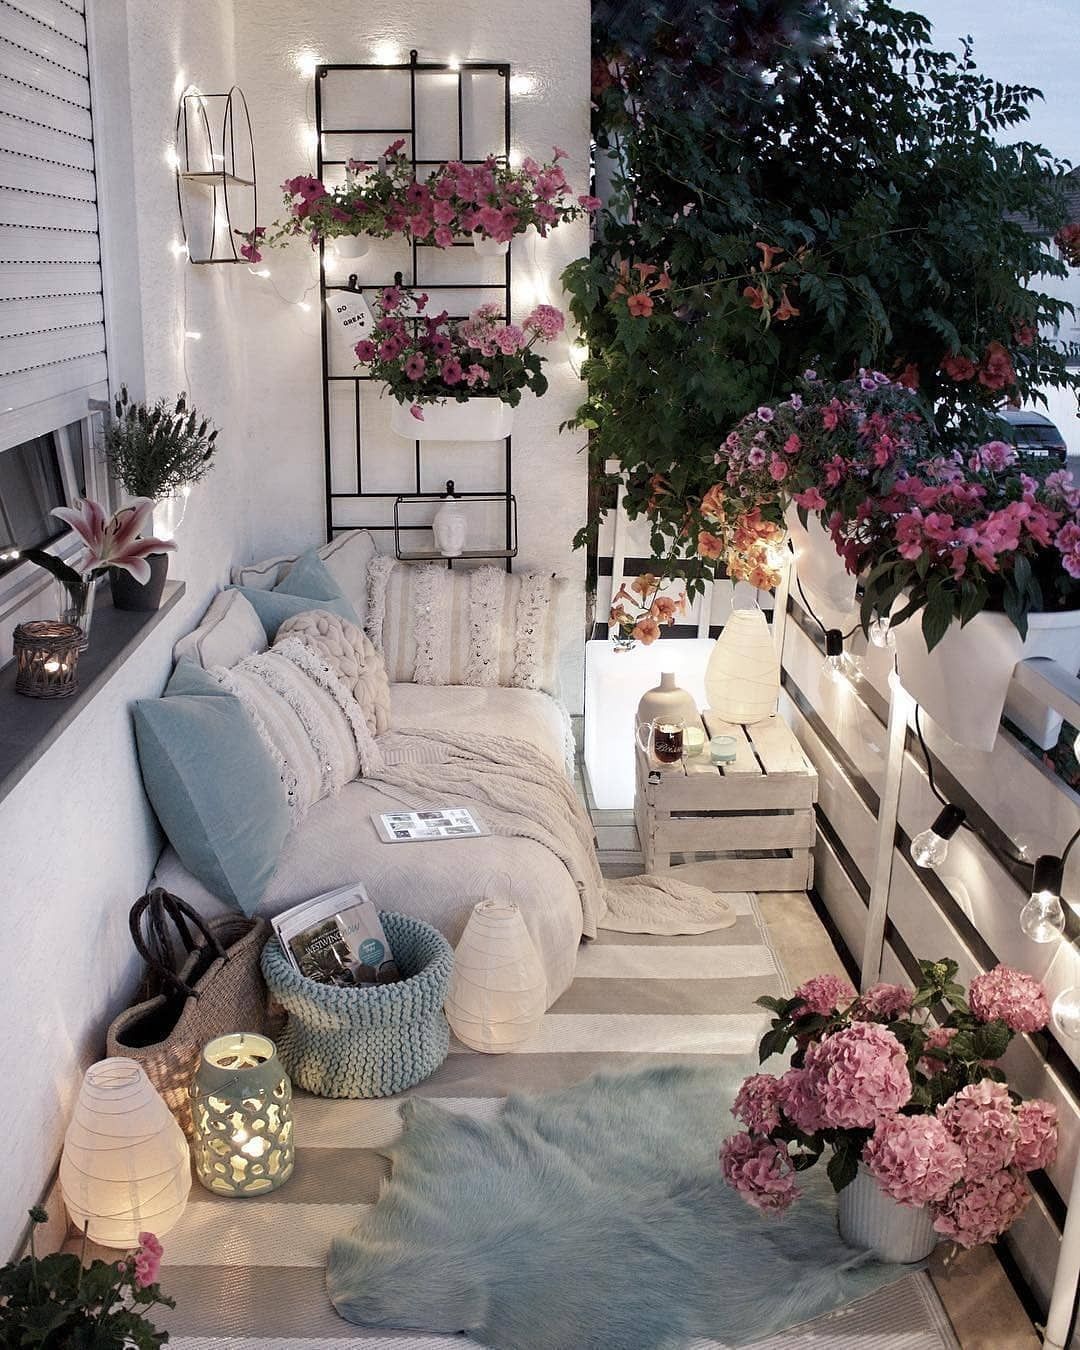 The Best Decorated Small Outdoor Balconies on Pinterest - Living After Midnite - The Best Decorated Small Outdoor Balconies on Pinterest - Living After Midnite -   16 diy Apartment patio ideas